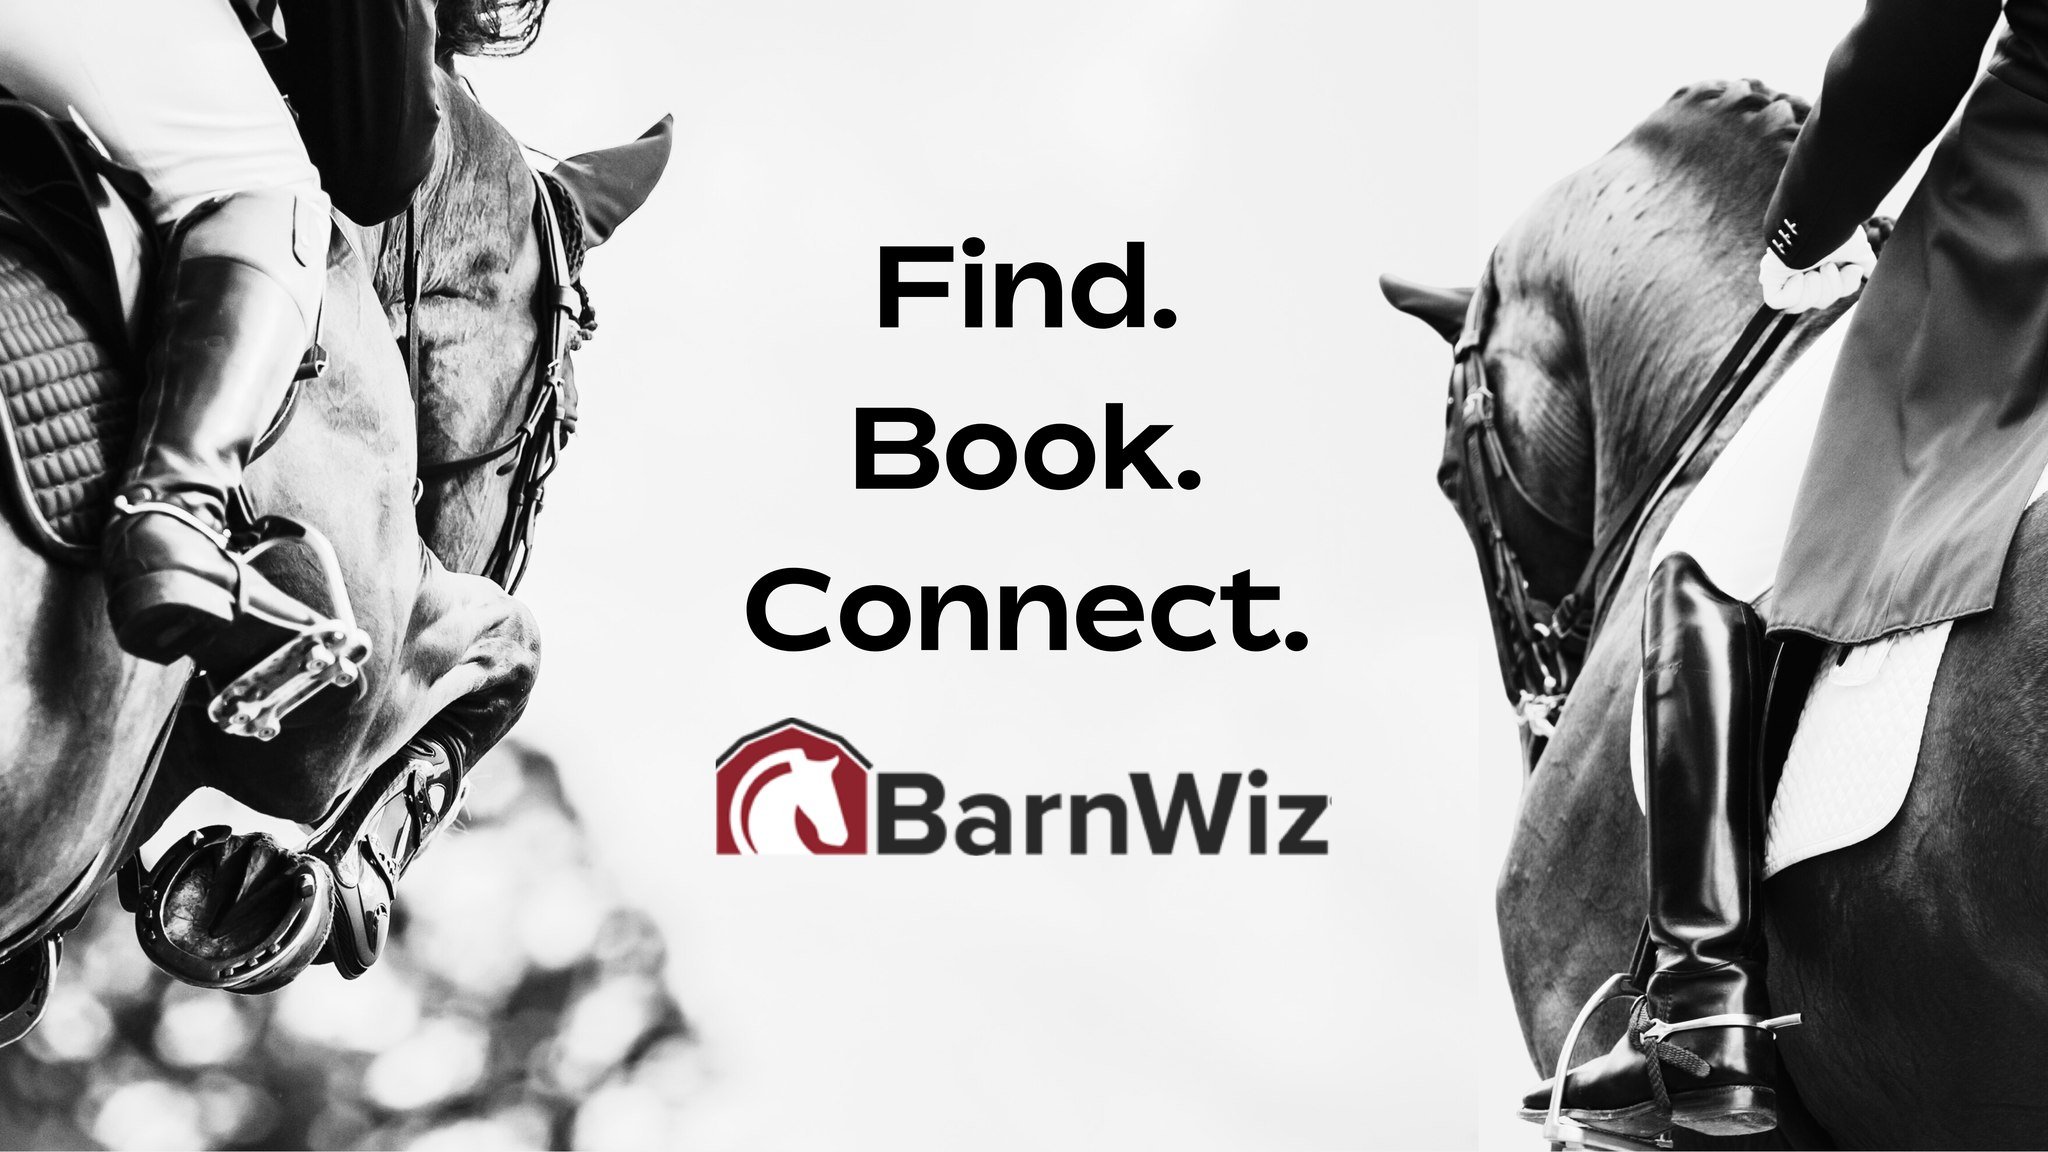 Have you downloaded the BarnWiz App yet? Our new app lets you:

Create a Professional Listing to promote your boarding or training businesses
Create a Rider and/or Horse Profile and search local horse boarding and training services
Book boarding and 